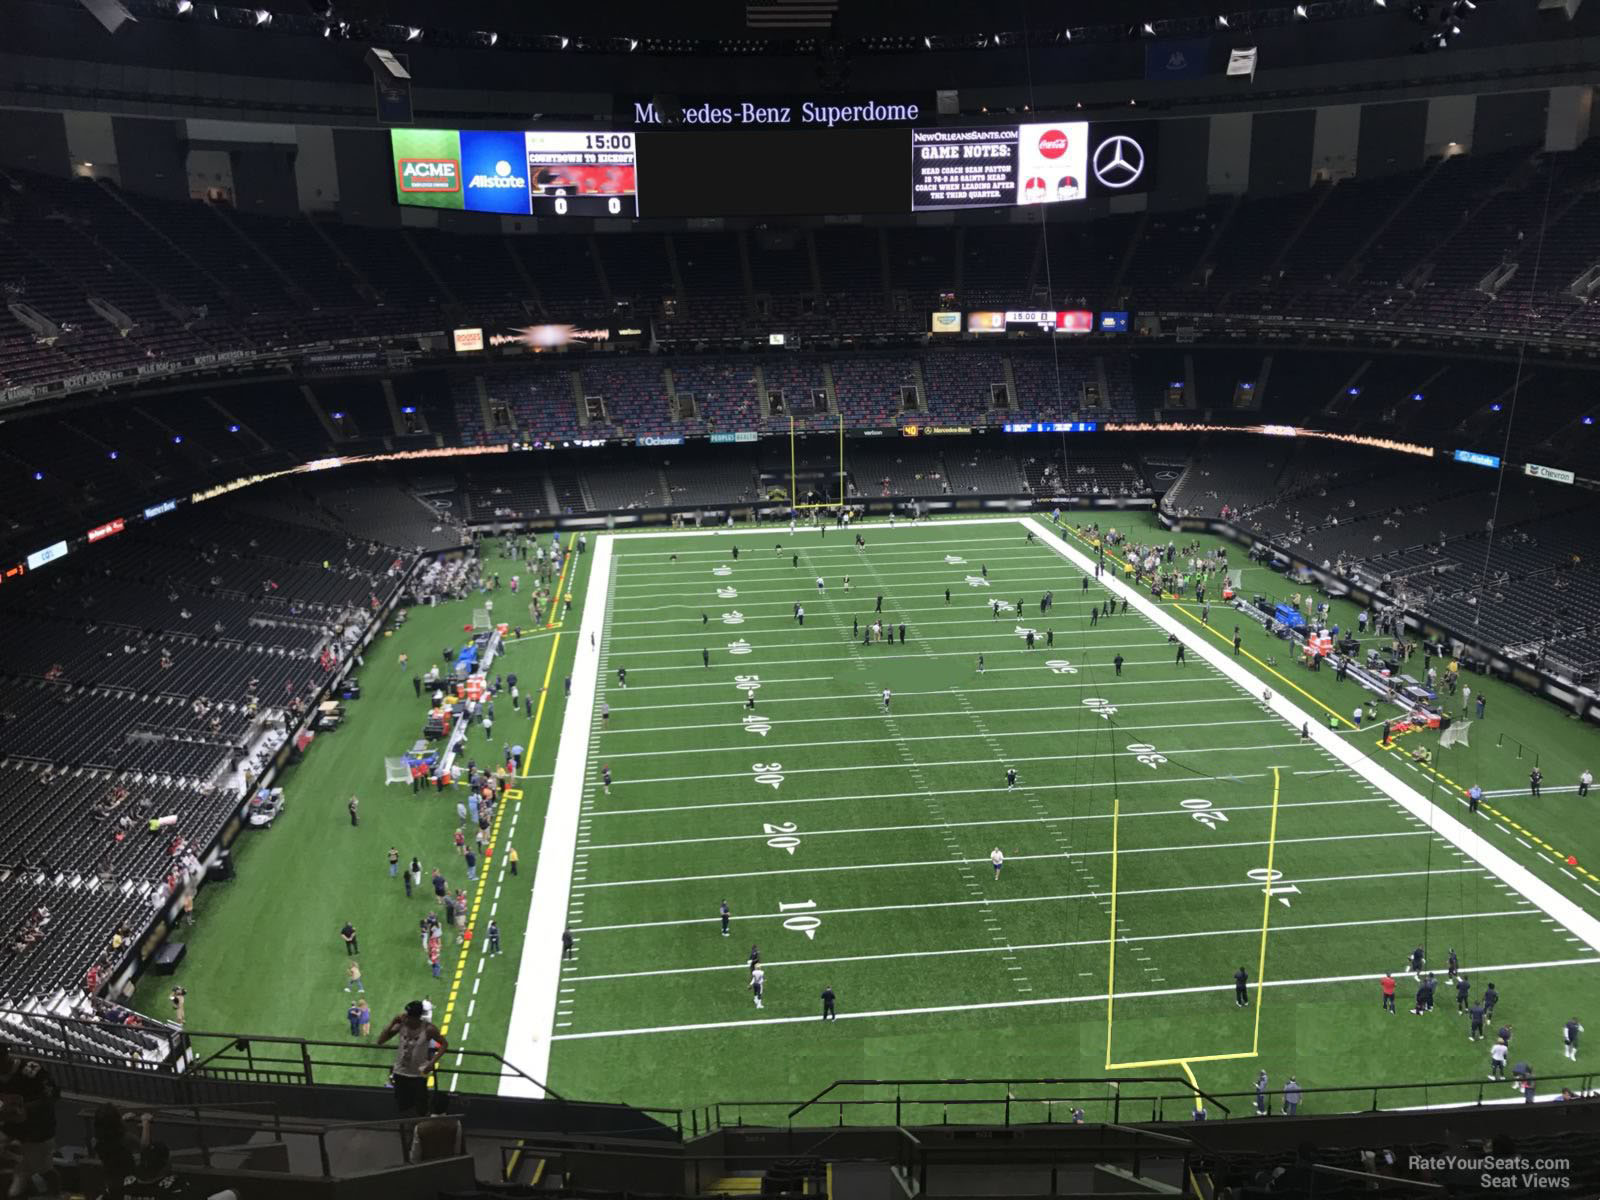 section 603, row 17 seat view  for football - caesars superdome